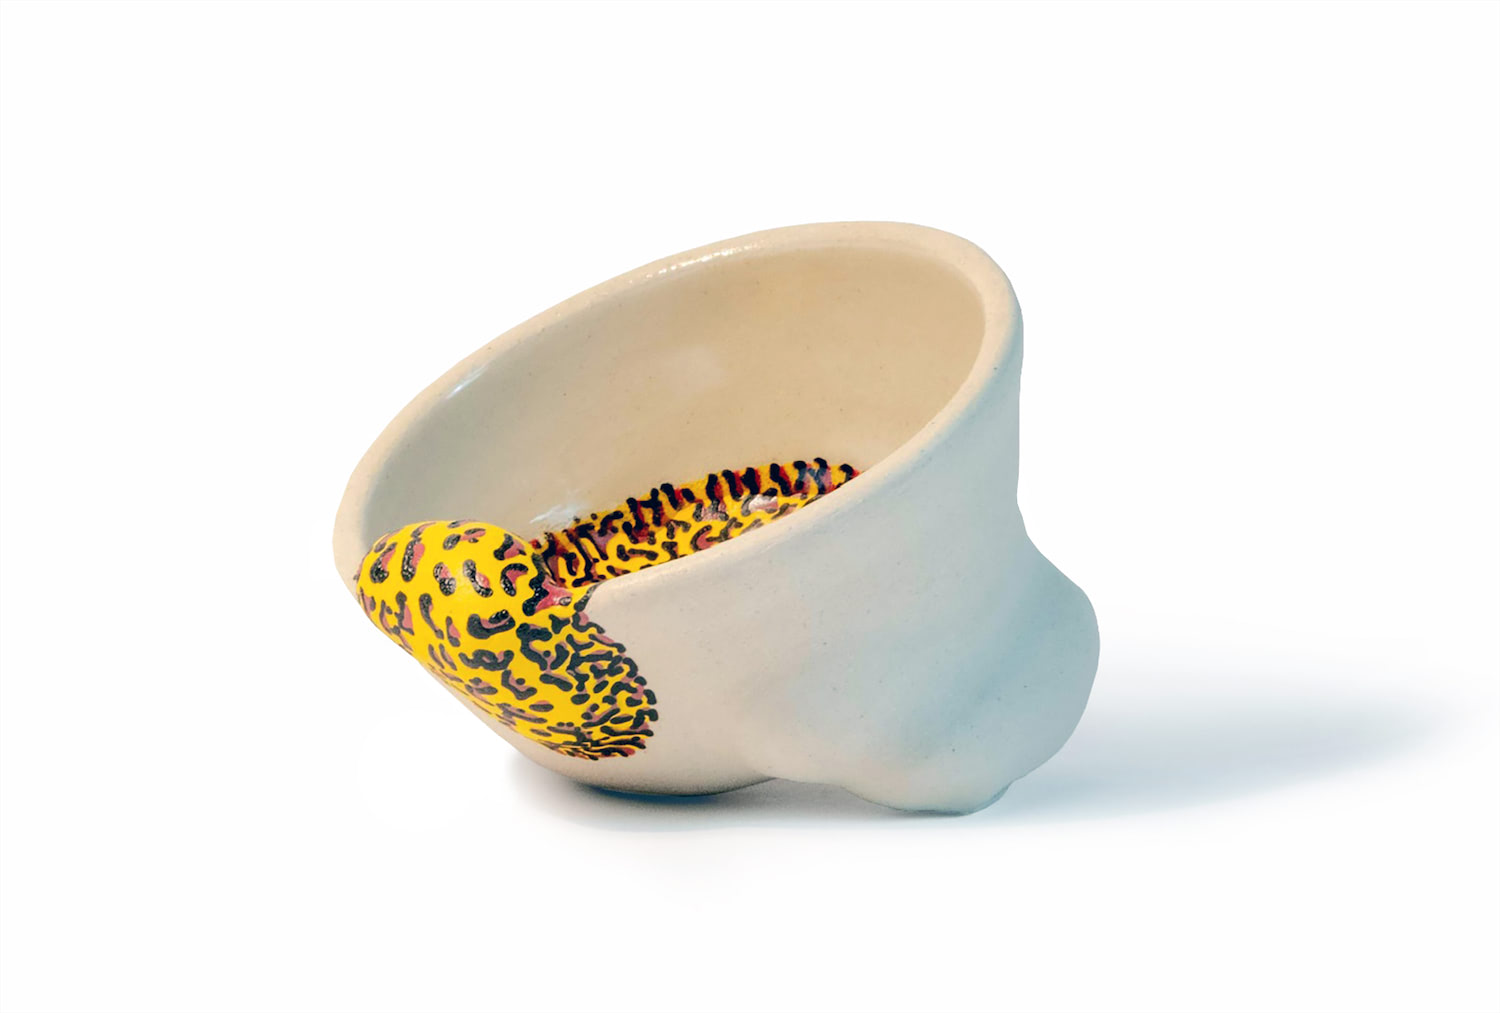 An image of a white bowl form with a yellow, red, and black line pattern that sculptural surface additions that move from the exterior to the interior.